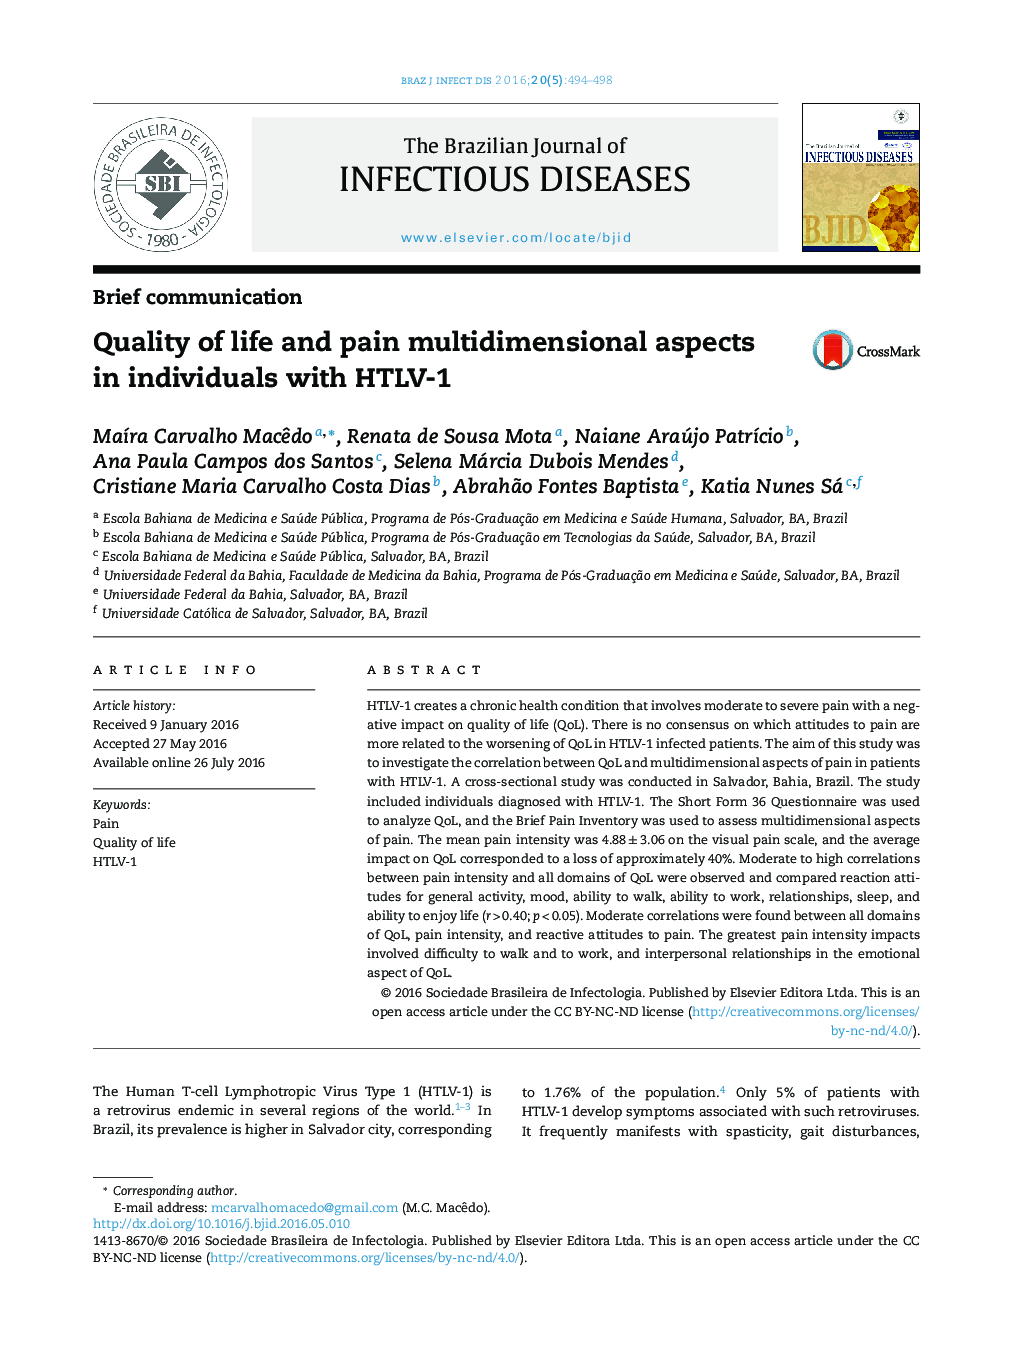 Quality of life and pain multidimensional aspects in individuals with HTLV-1